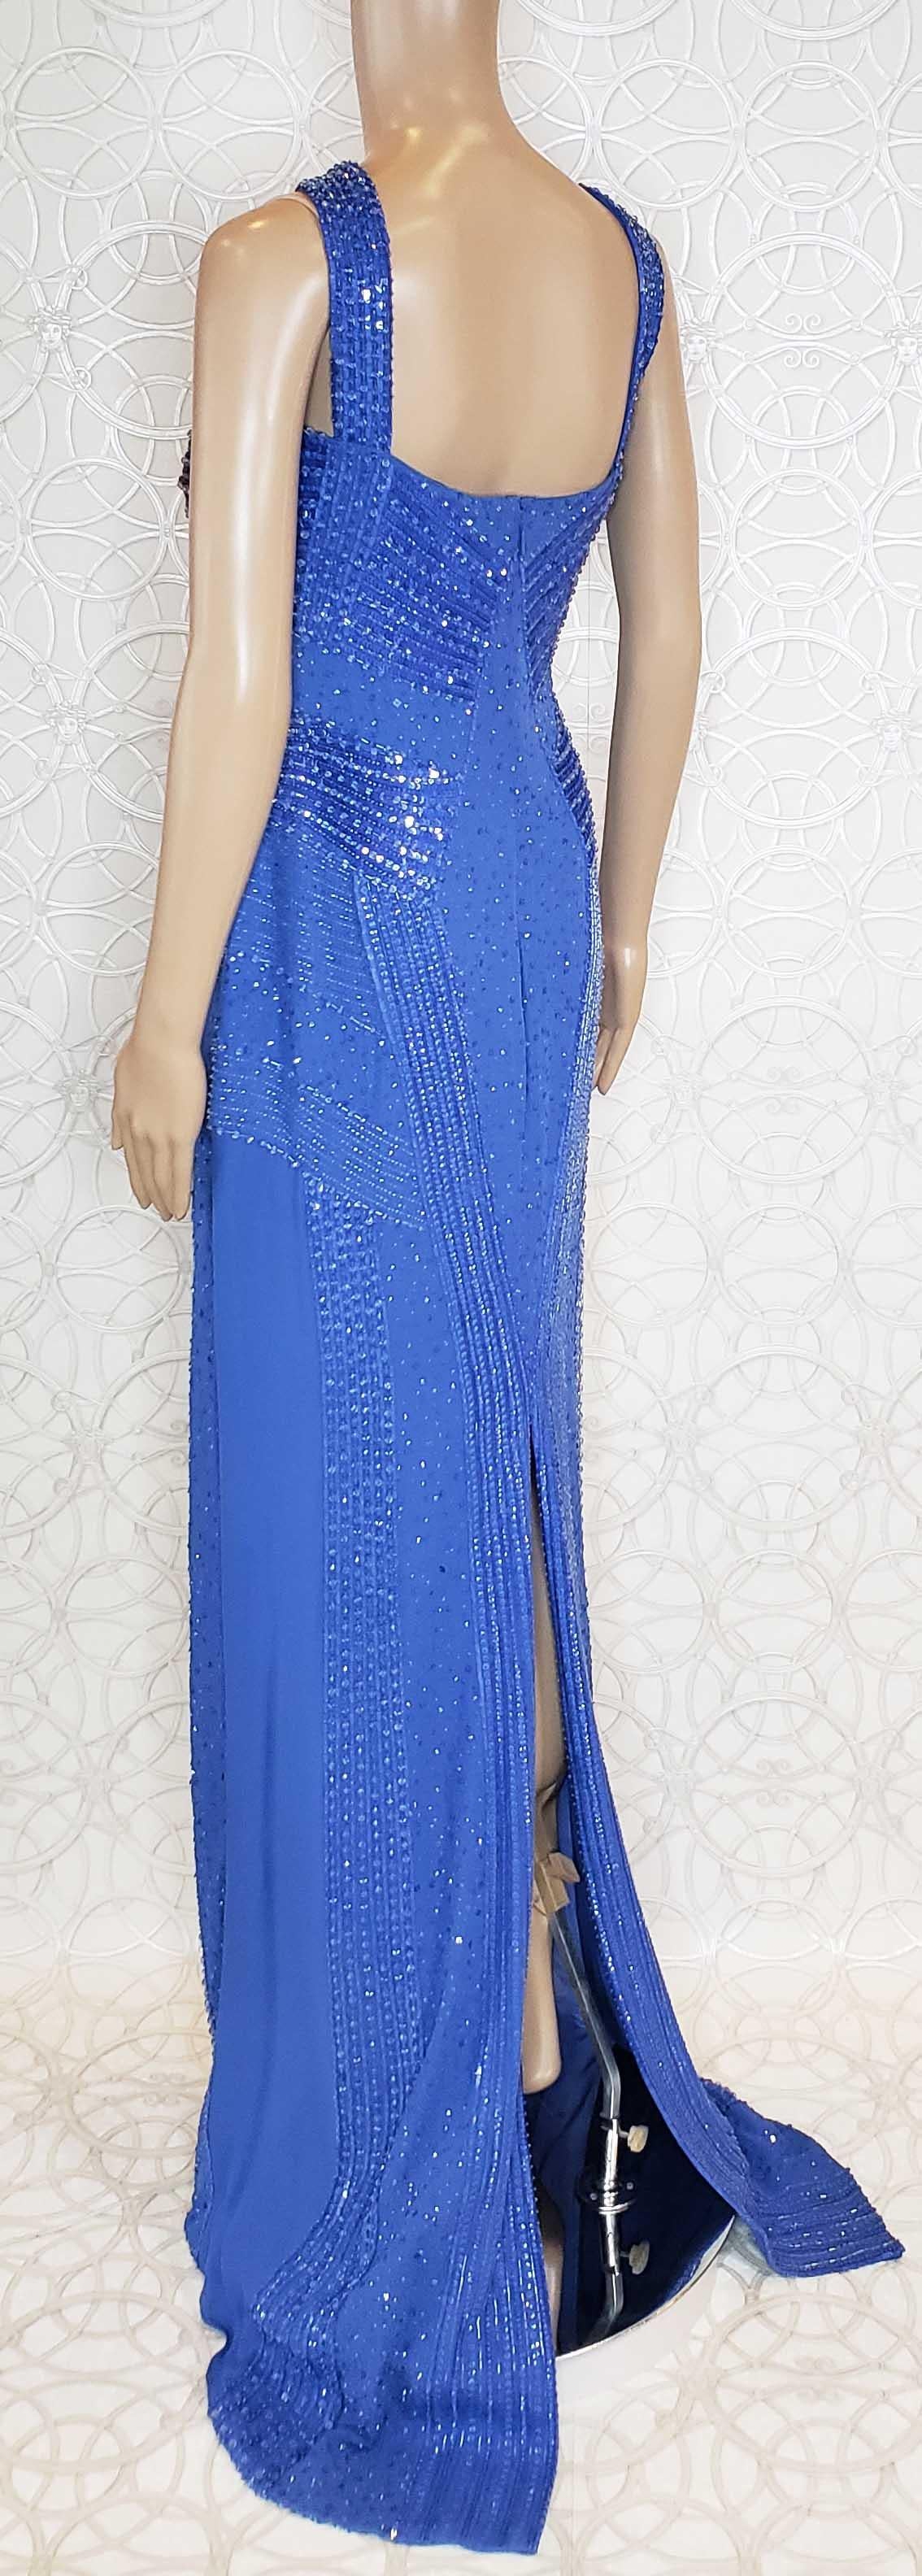 $12, 575 NEW VERSACE EMBELLISHED BLUE Gown 44 - 8 2